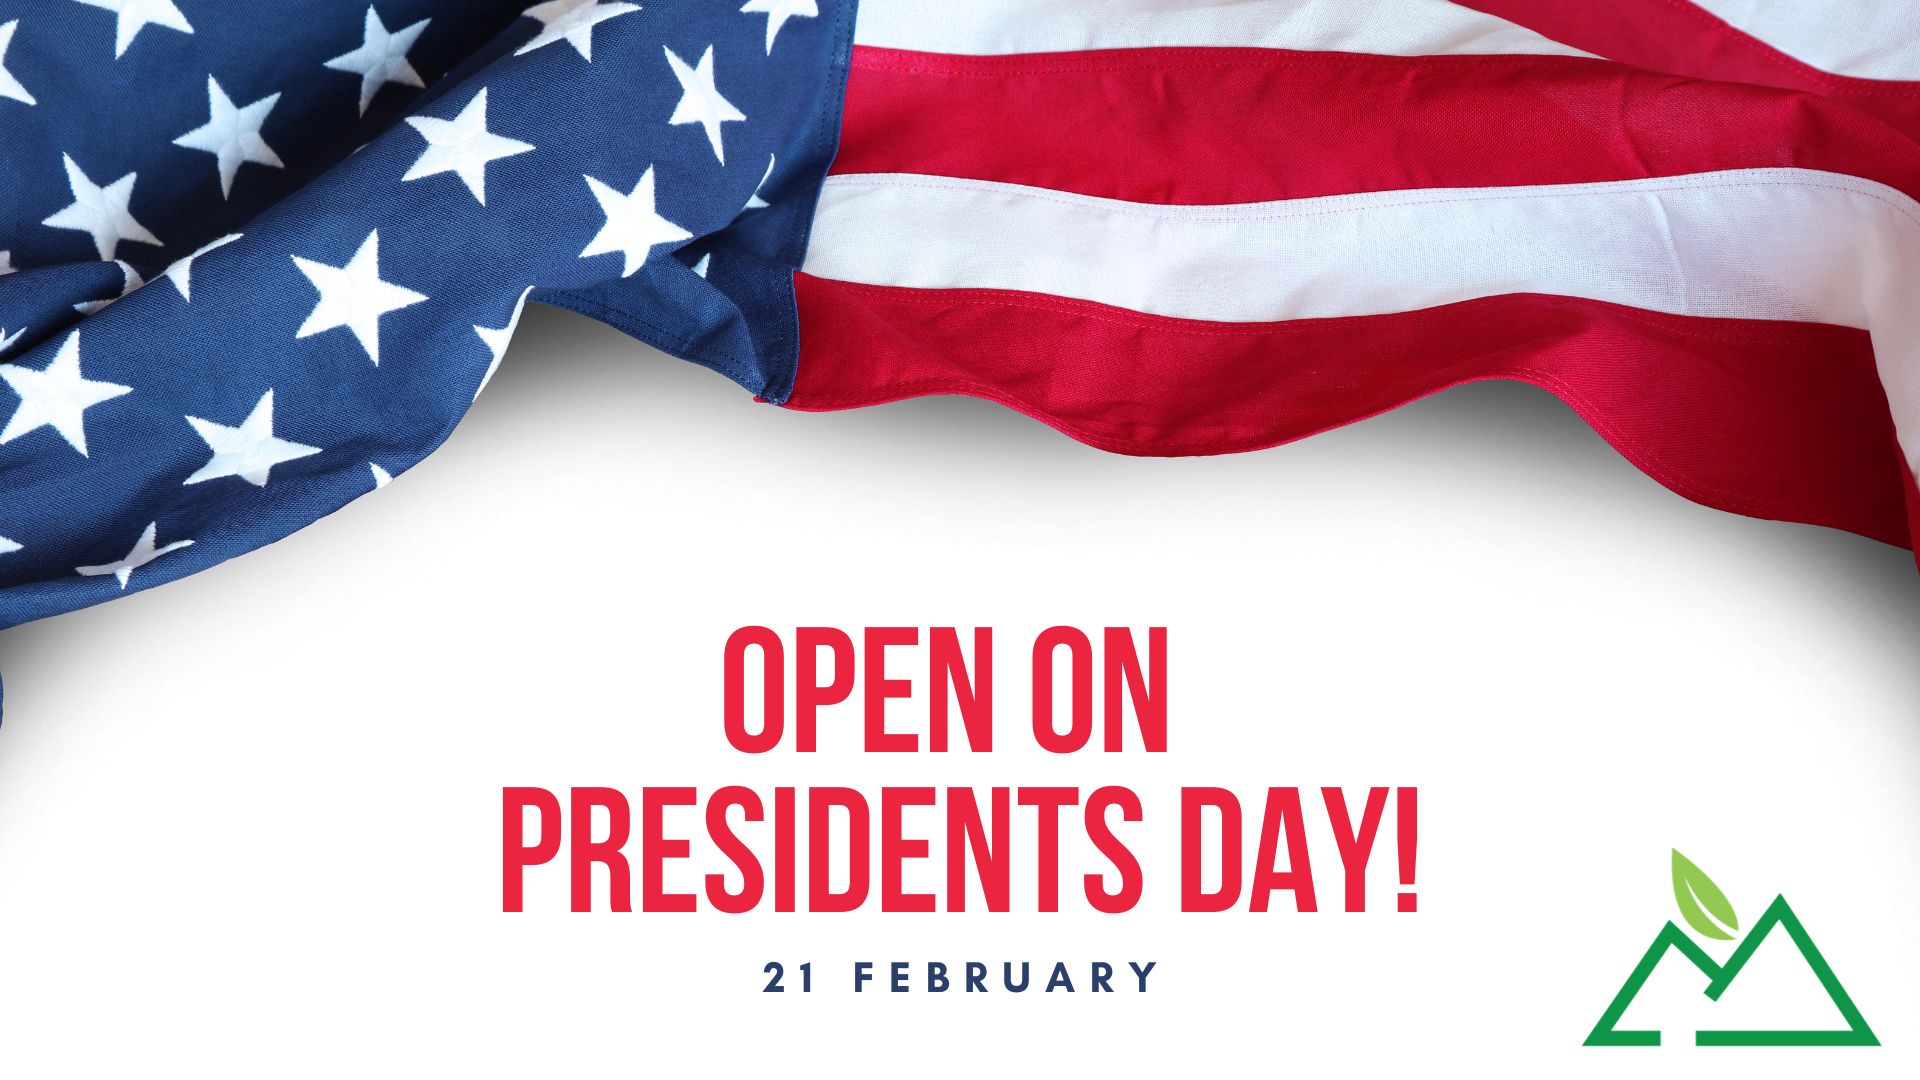 Open on Presidents Day!